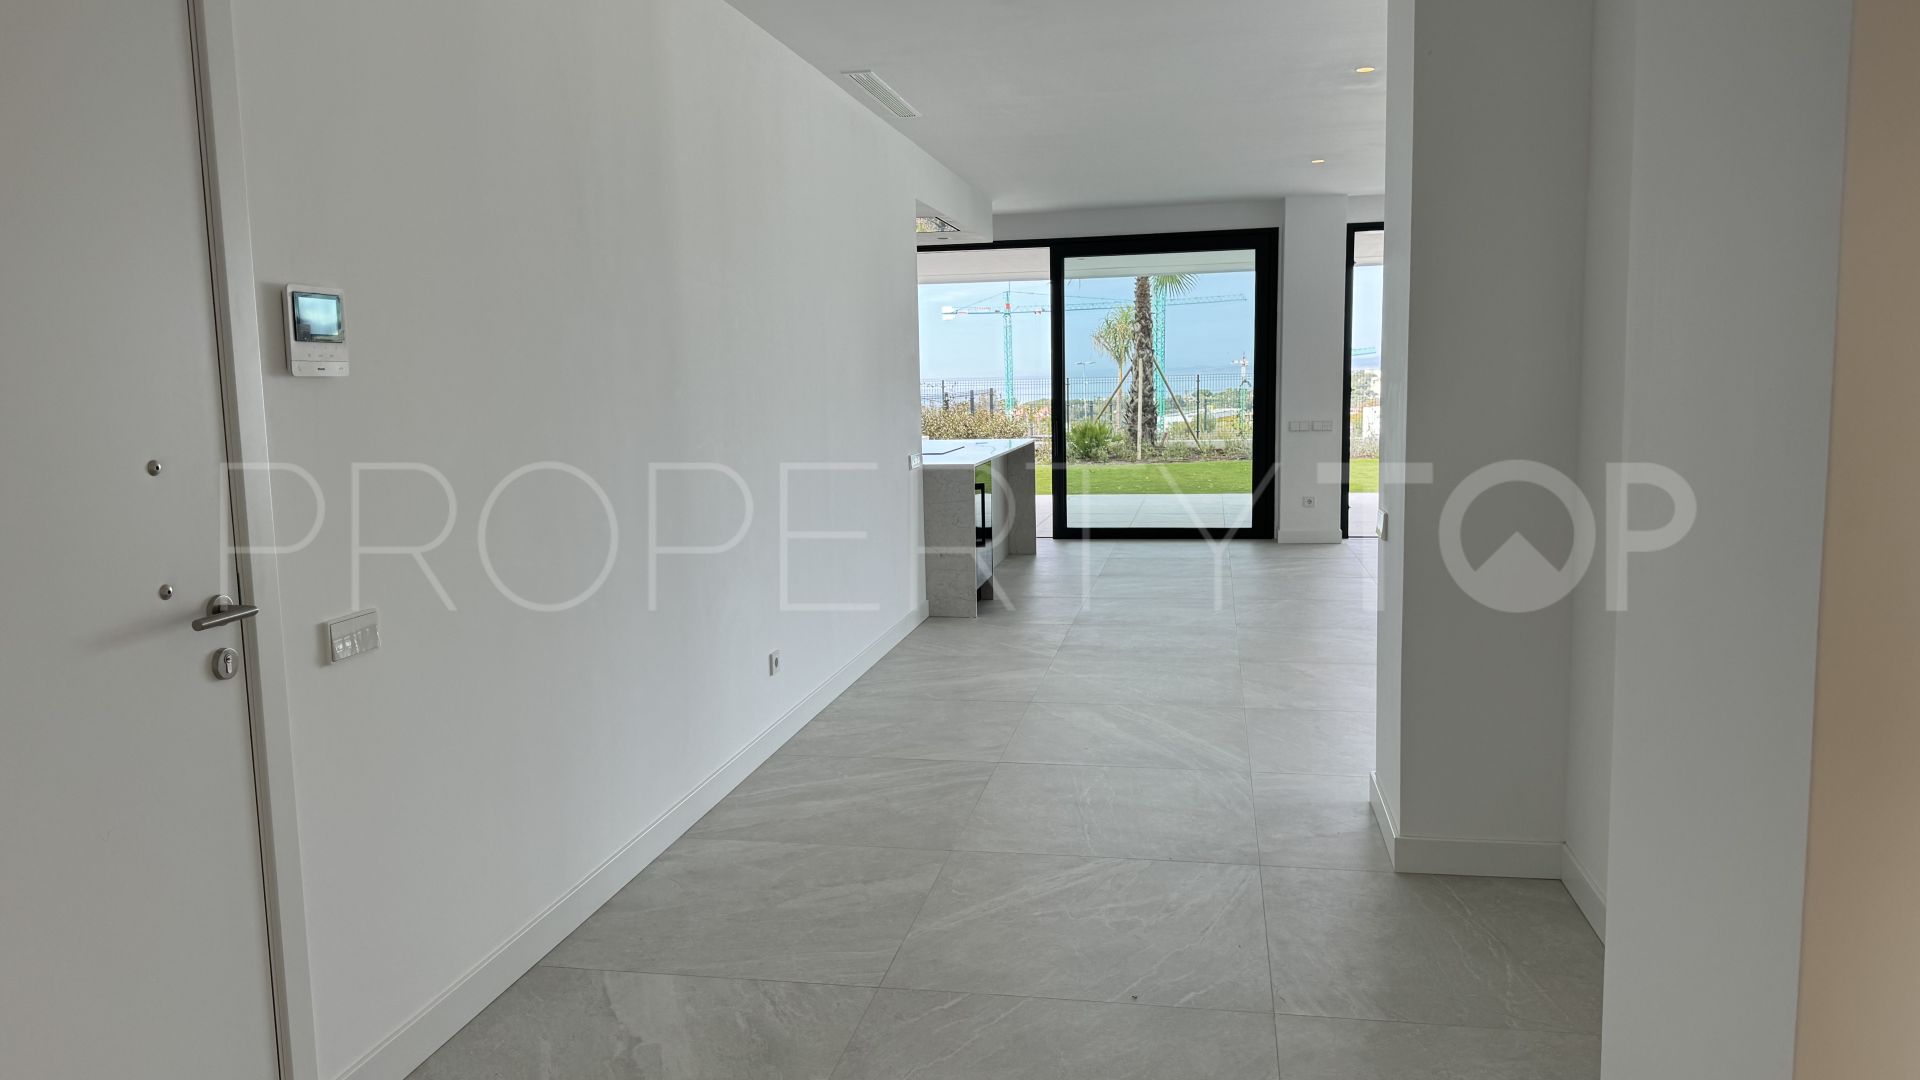 Ground floor apartment for sale in Marbella City with 3 bedrooms